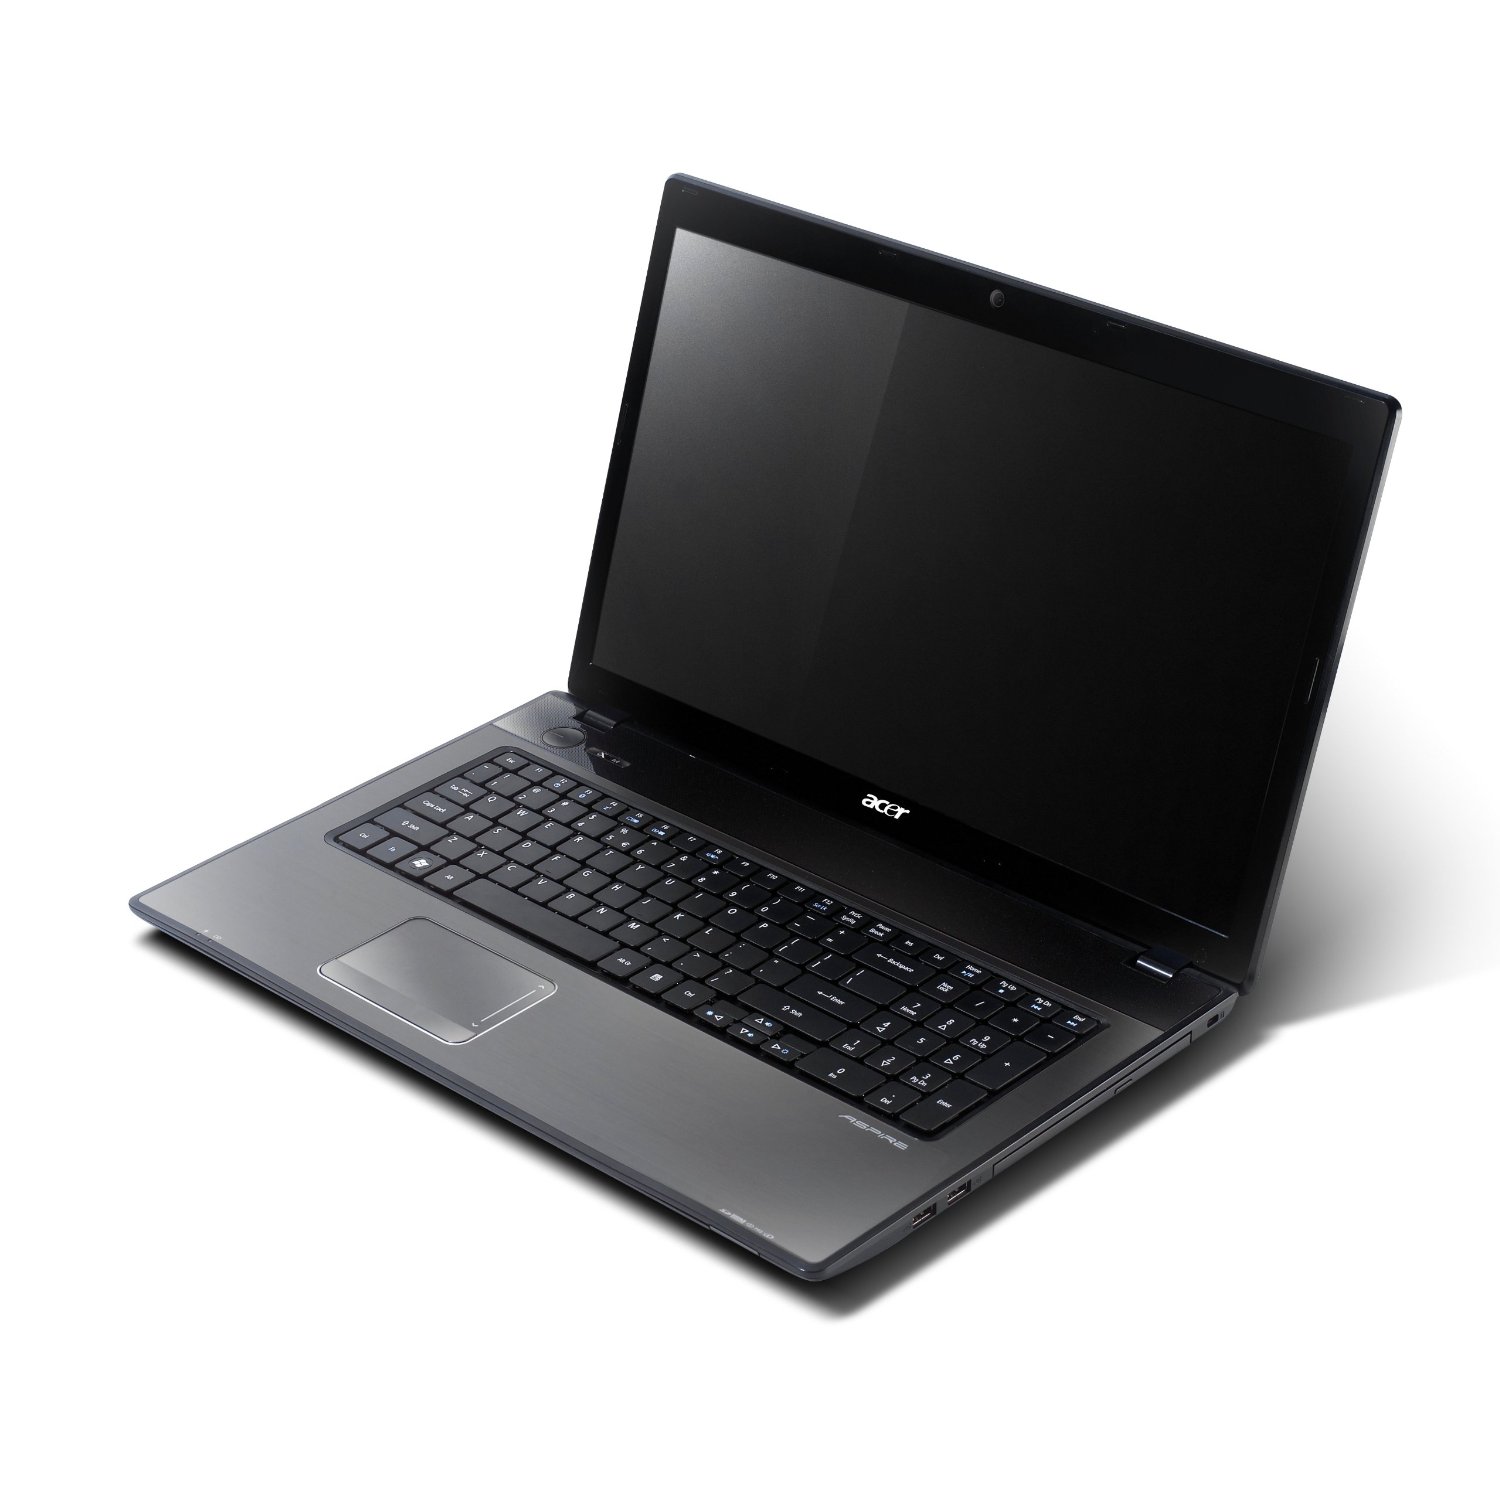 http://thetechjournal.com/wp-content/uploads/images/1111/1320601757-acer-as7741g6426-173inch-laptop--9.jpg